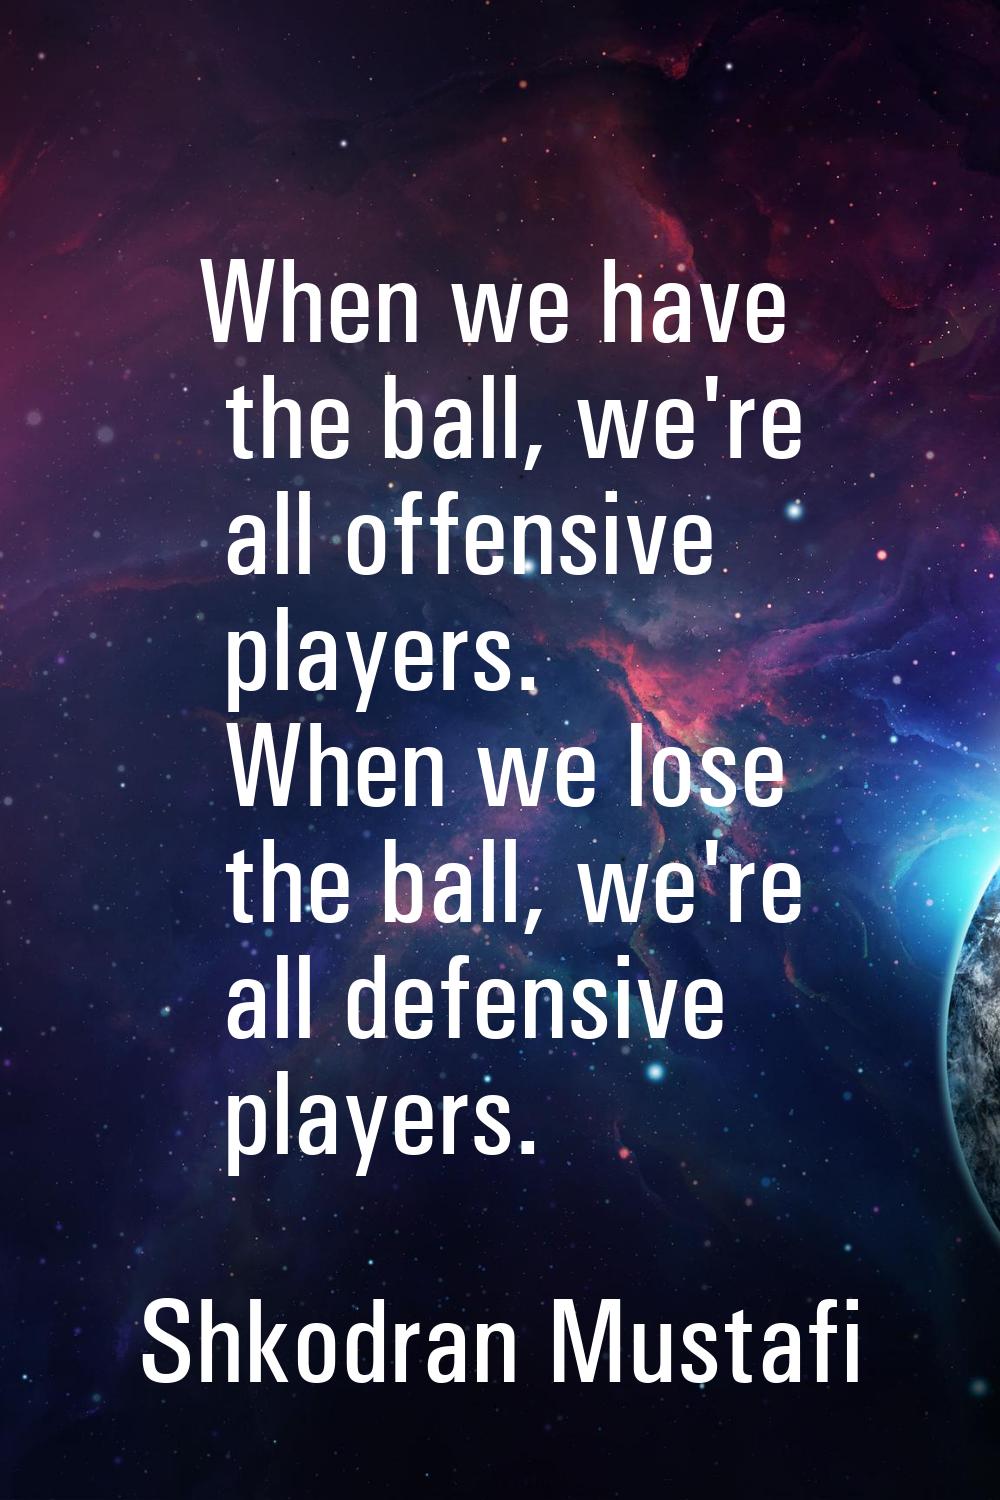 When we have the ball, we're all offensive players. When we lose the ball, we're all defensive play